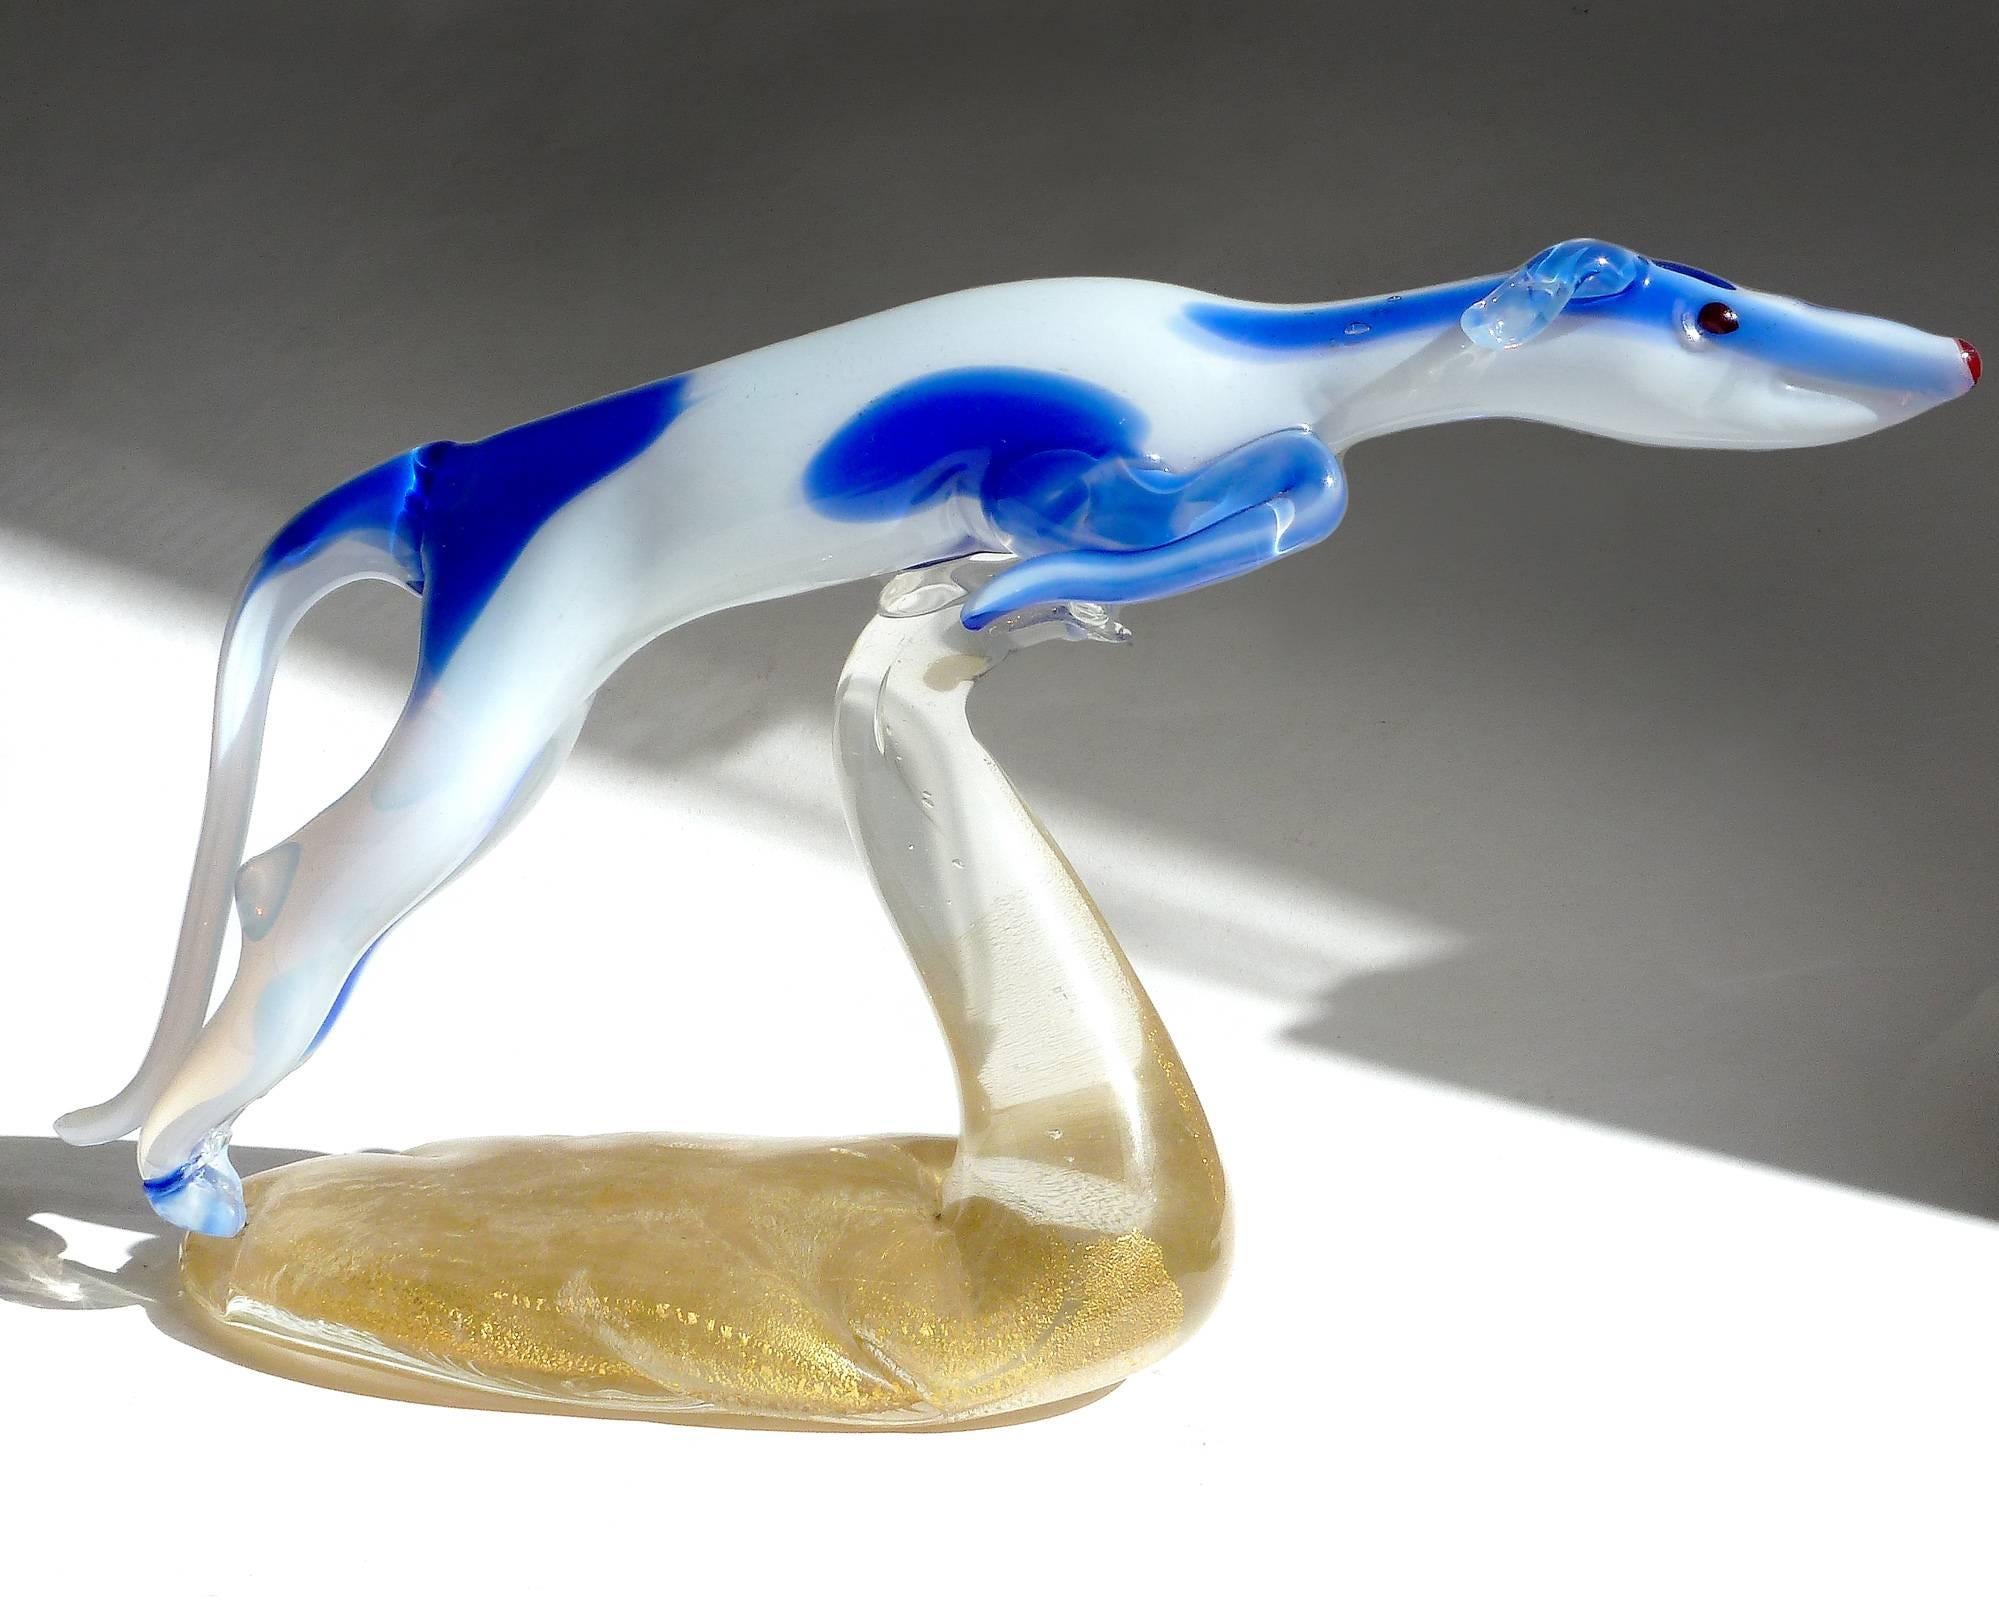 Beautiful and rare, vintage Murano hand blown opalescent white and cobalt blue spots Italian art glass leaping whippet or greyhound dog sculpture, on gold flecks base. The piece is very elegant, with an Art Deco feel, and portrays this wonderful dog